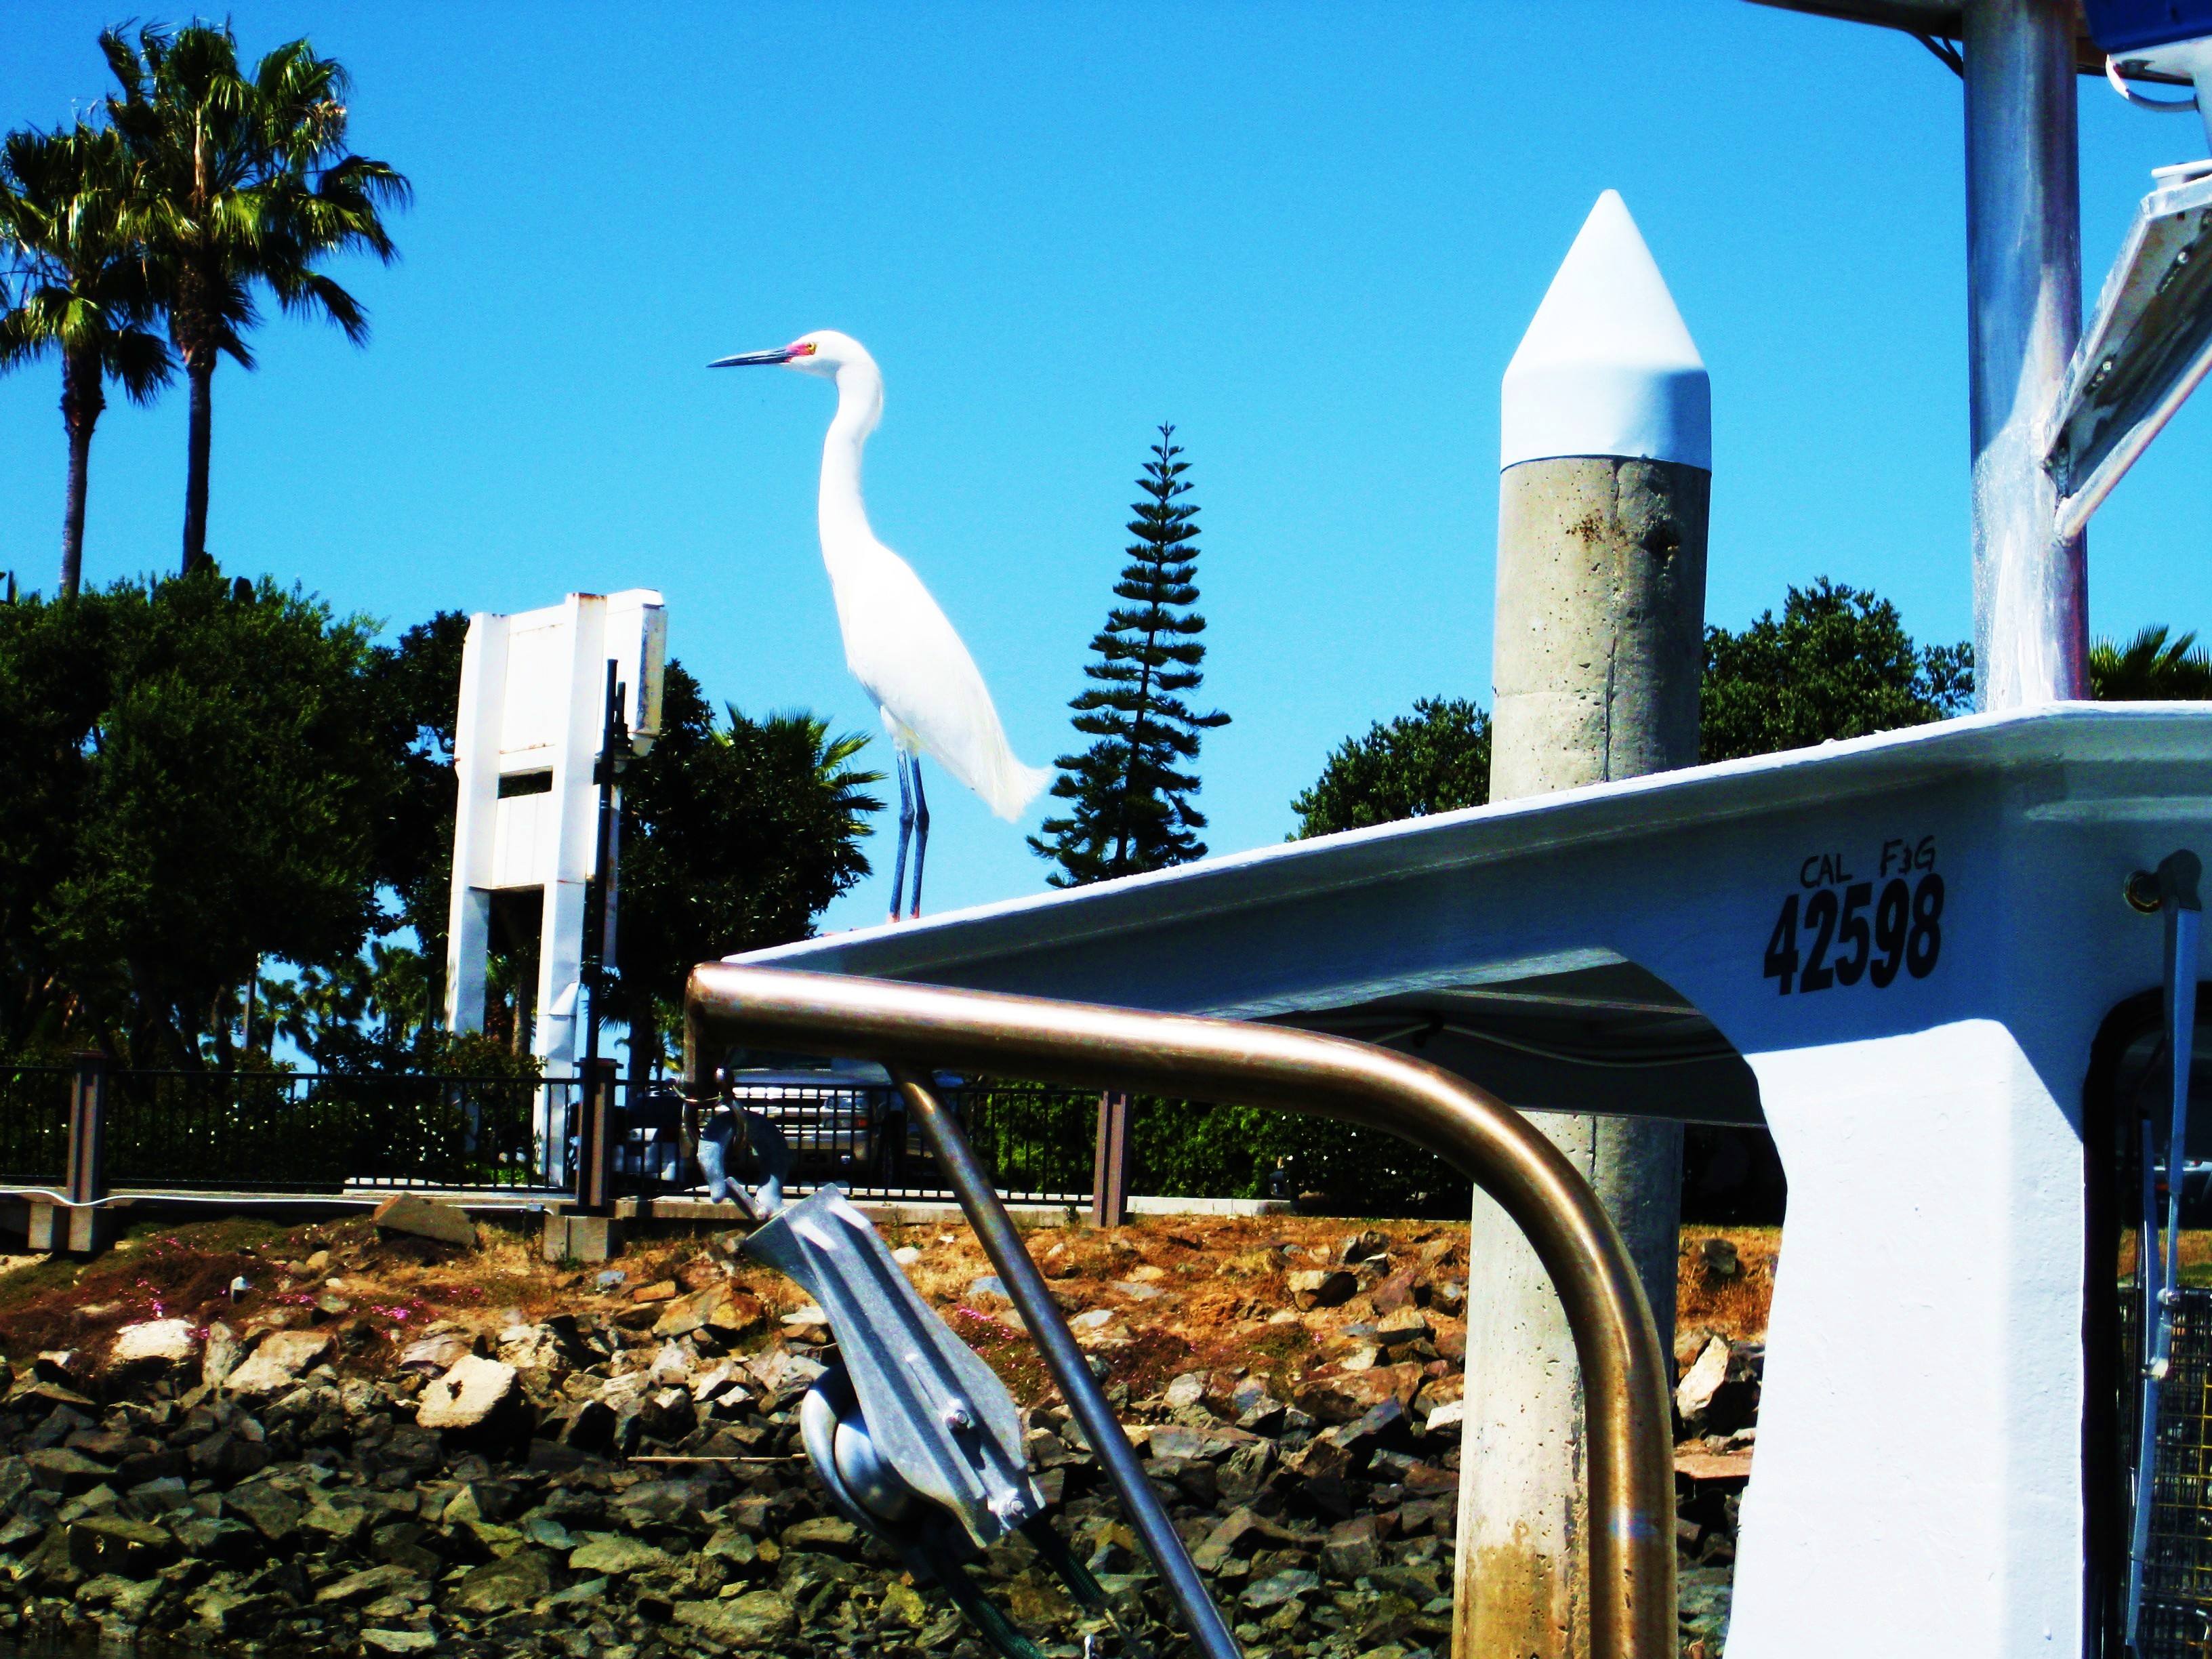 A snowy white Egret on the boat